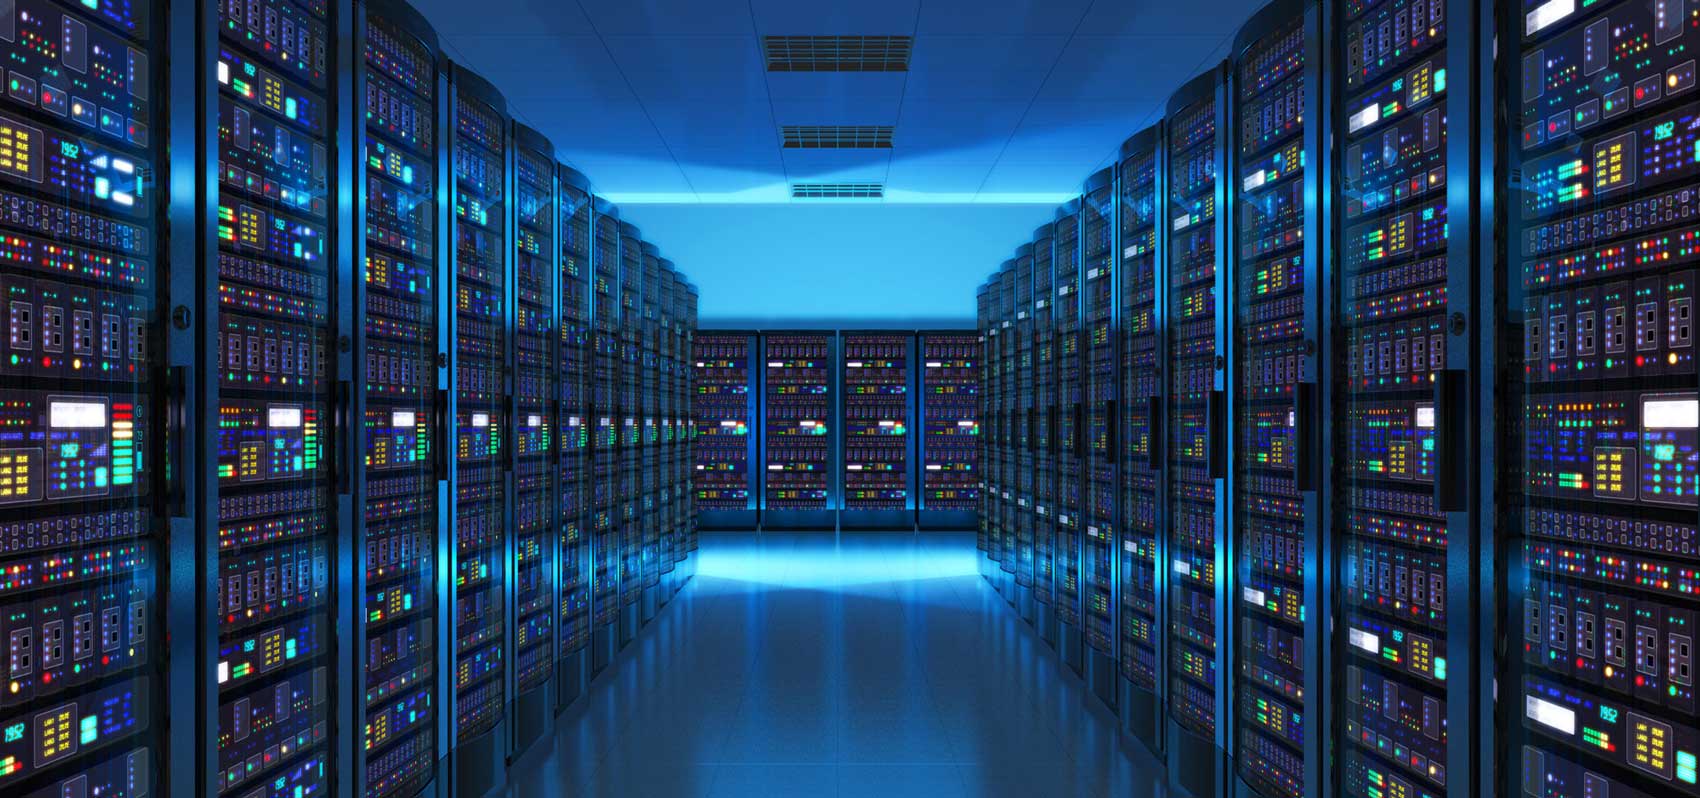 Which workloads should remain on-premises?